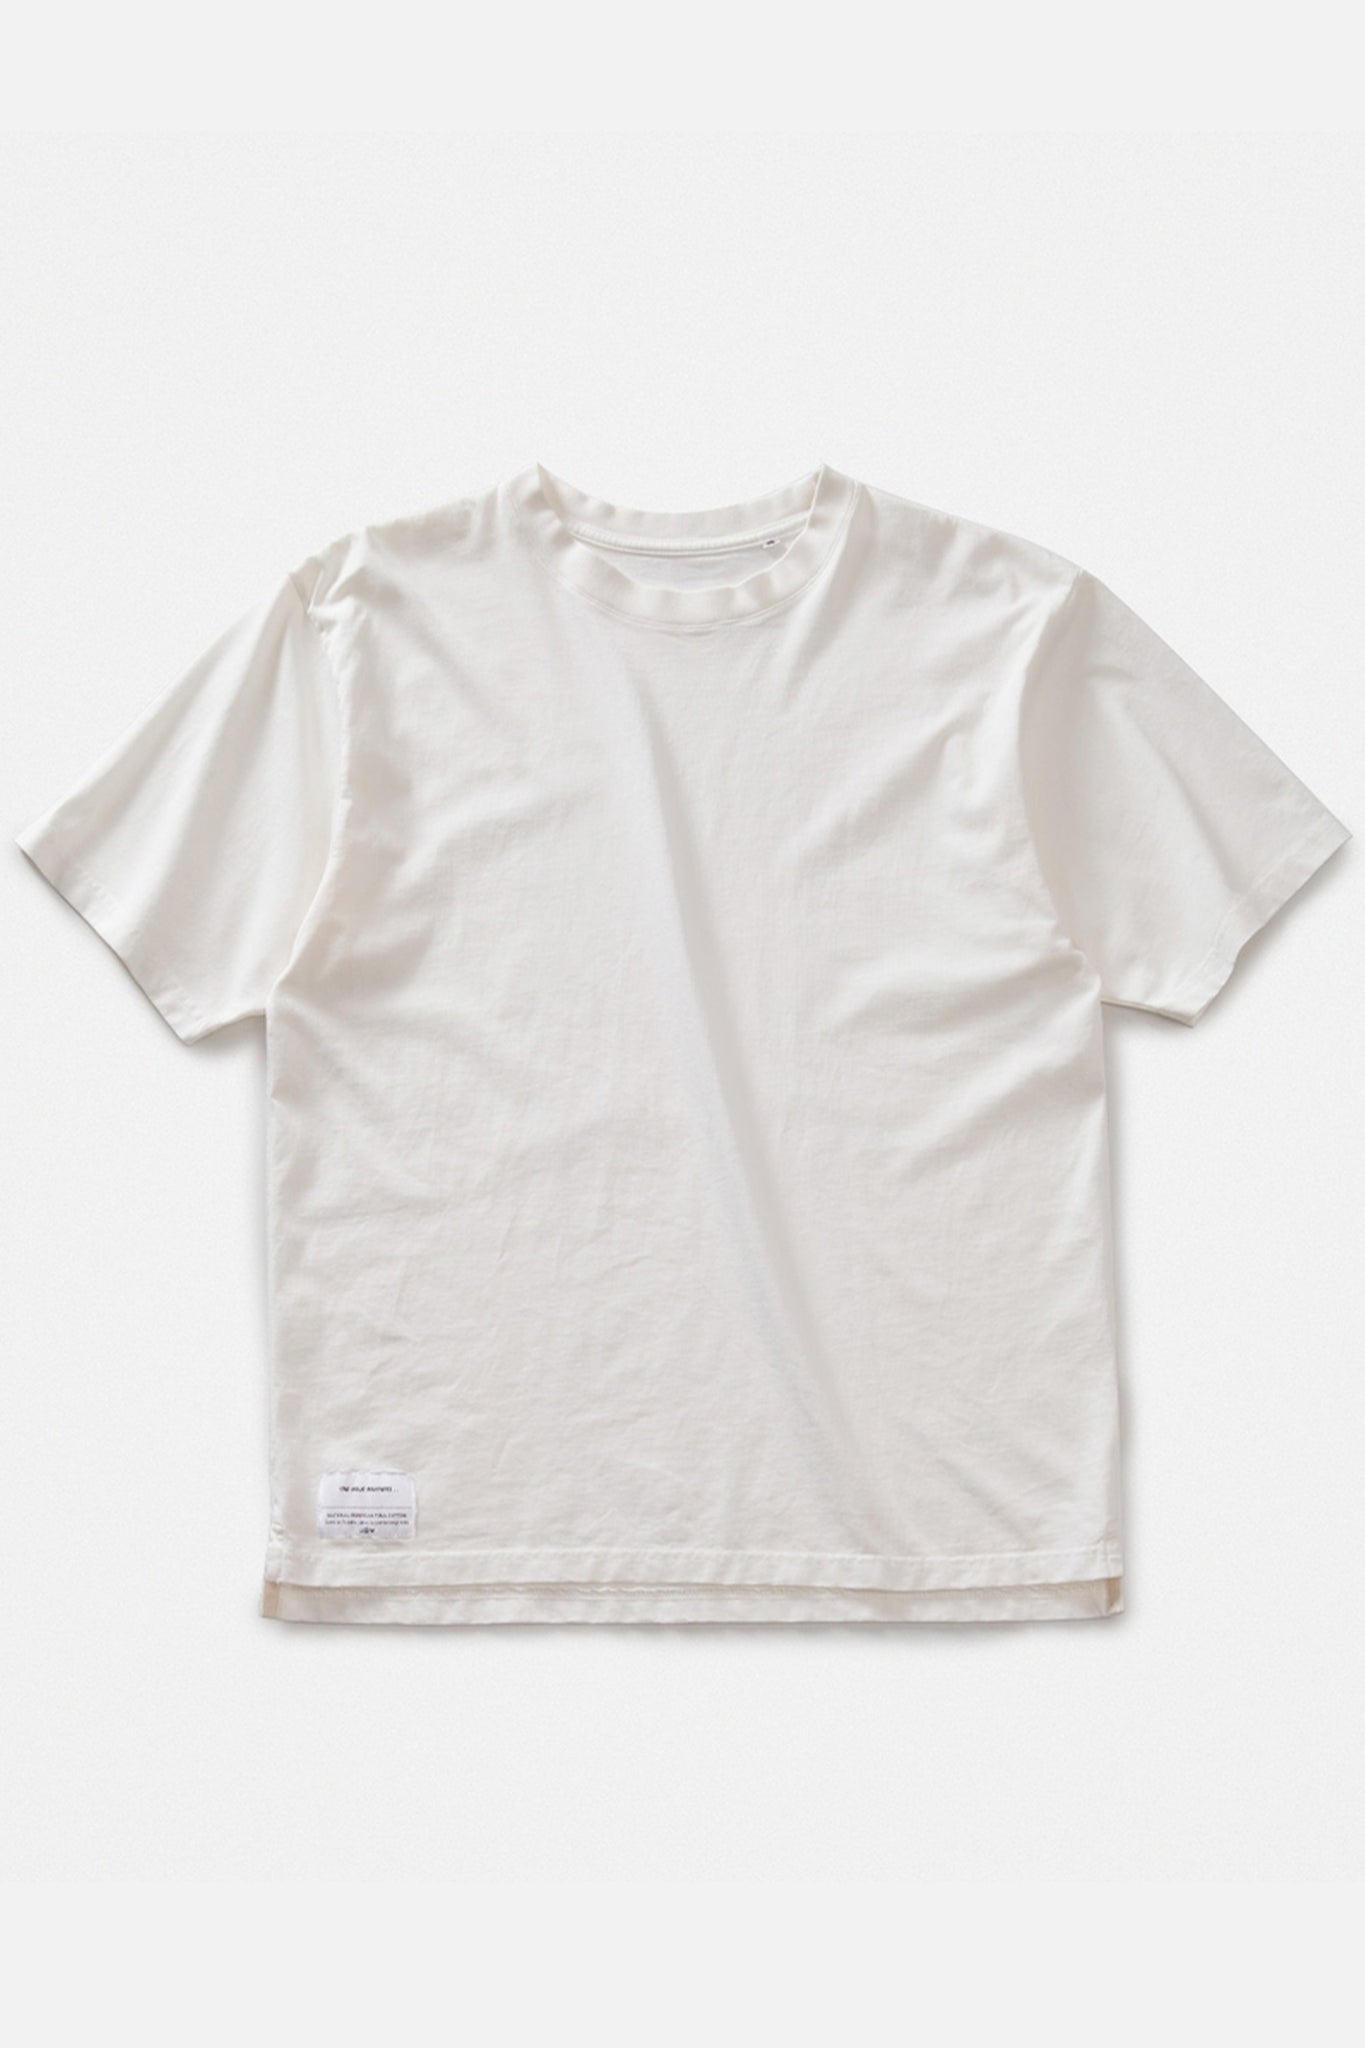 THE INOUE BROTHERS... "SINGLE JERSEY BOX T-SHIRT / WHITE"